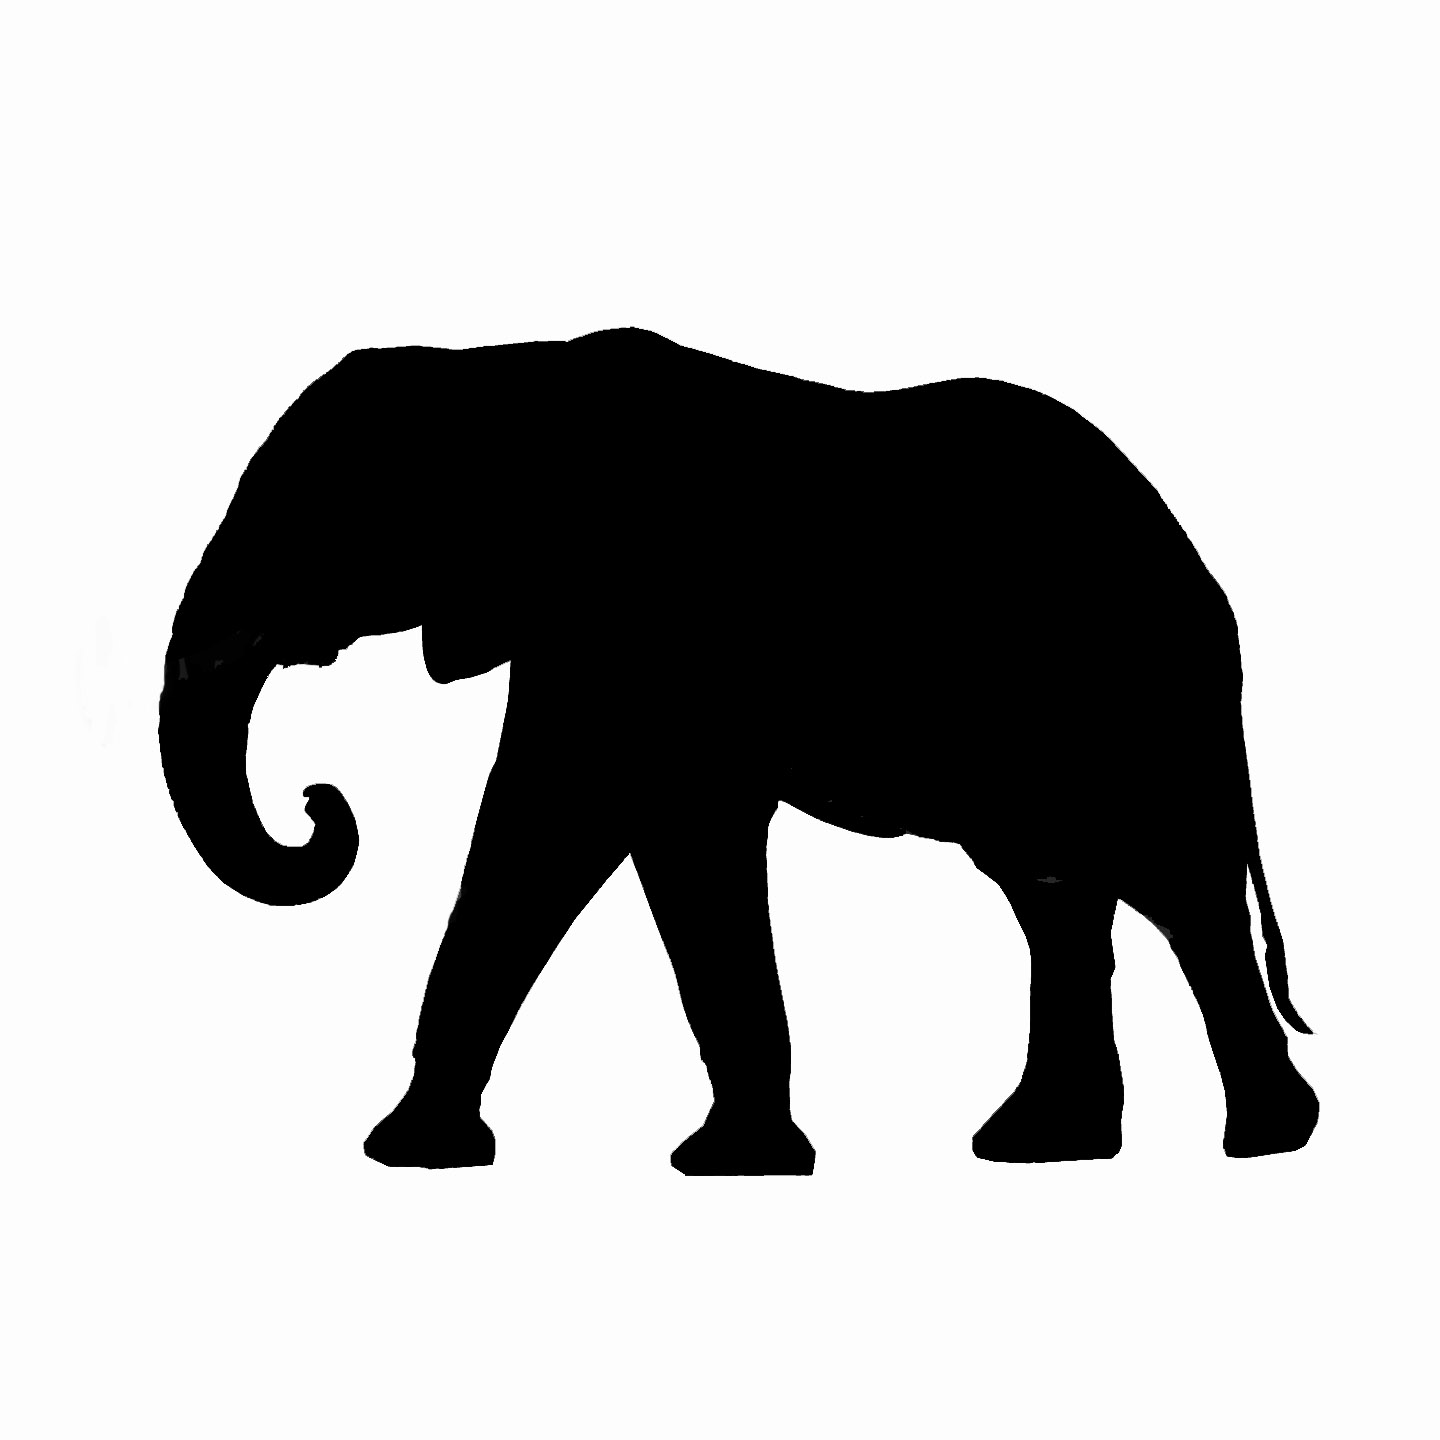 Elephant Silhouette - Clipart library